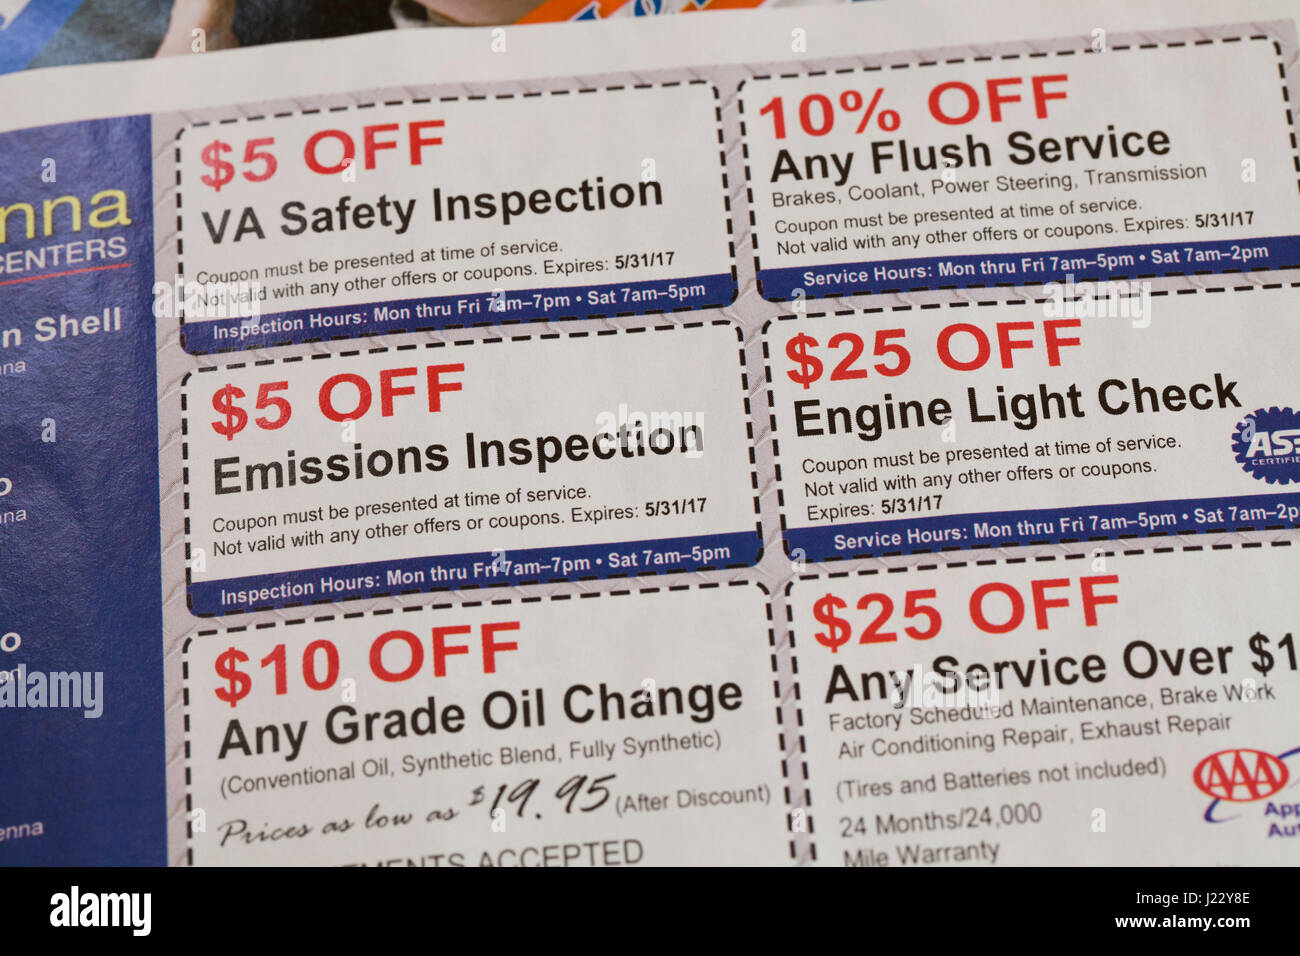 Auto maintenance and repair coupons in weekly mailer ad - USA Stock Photo